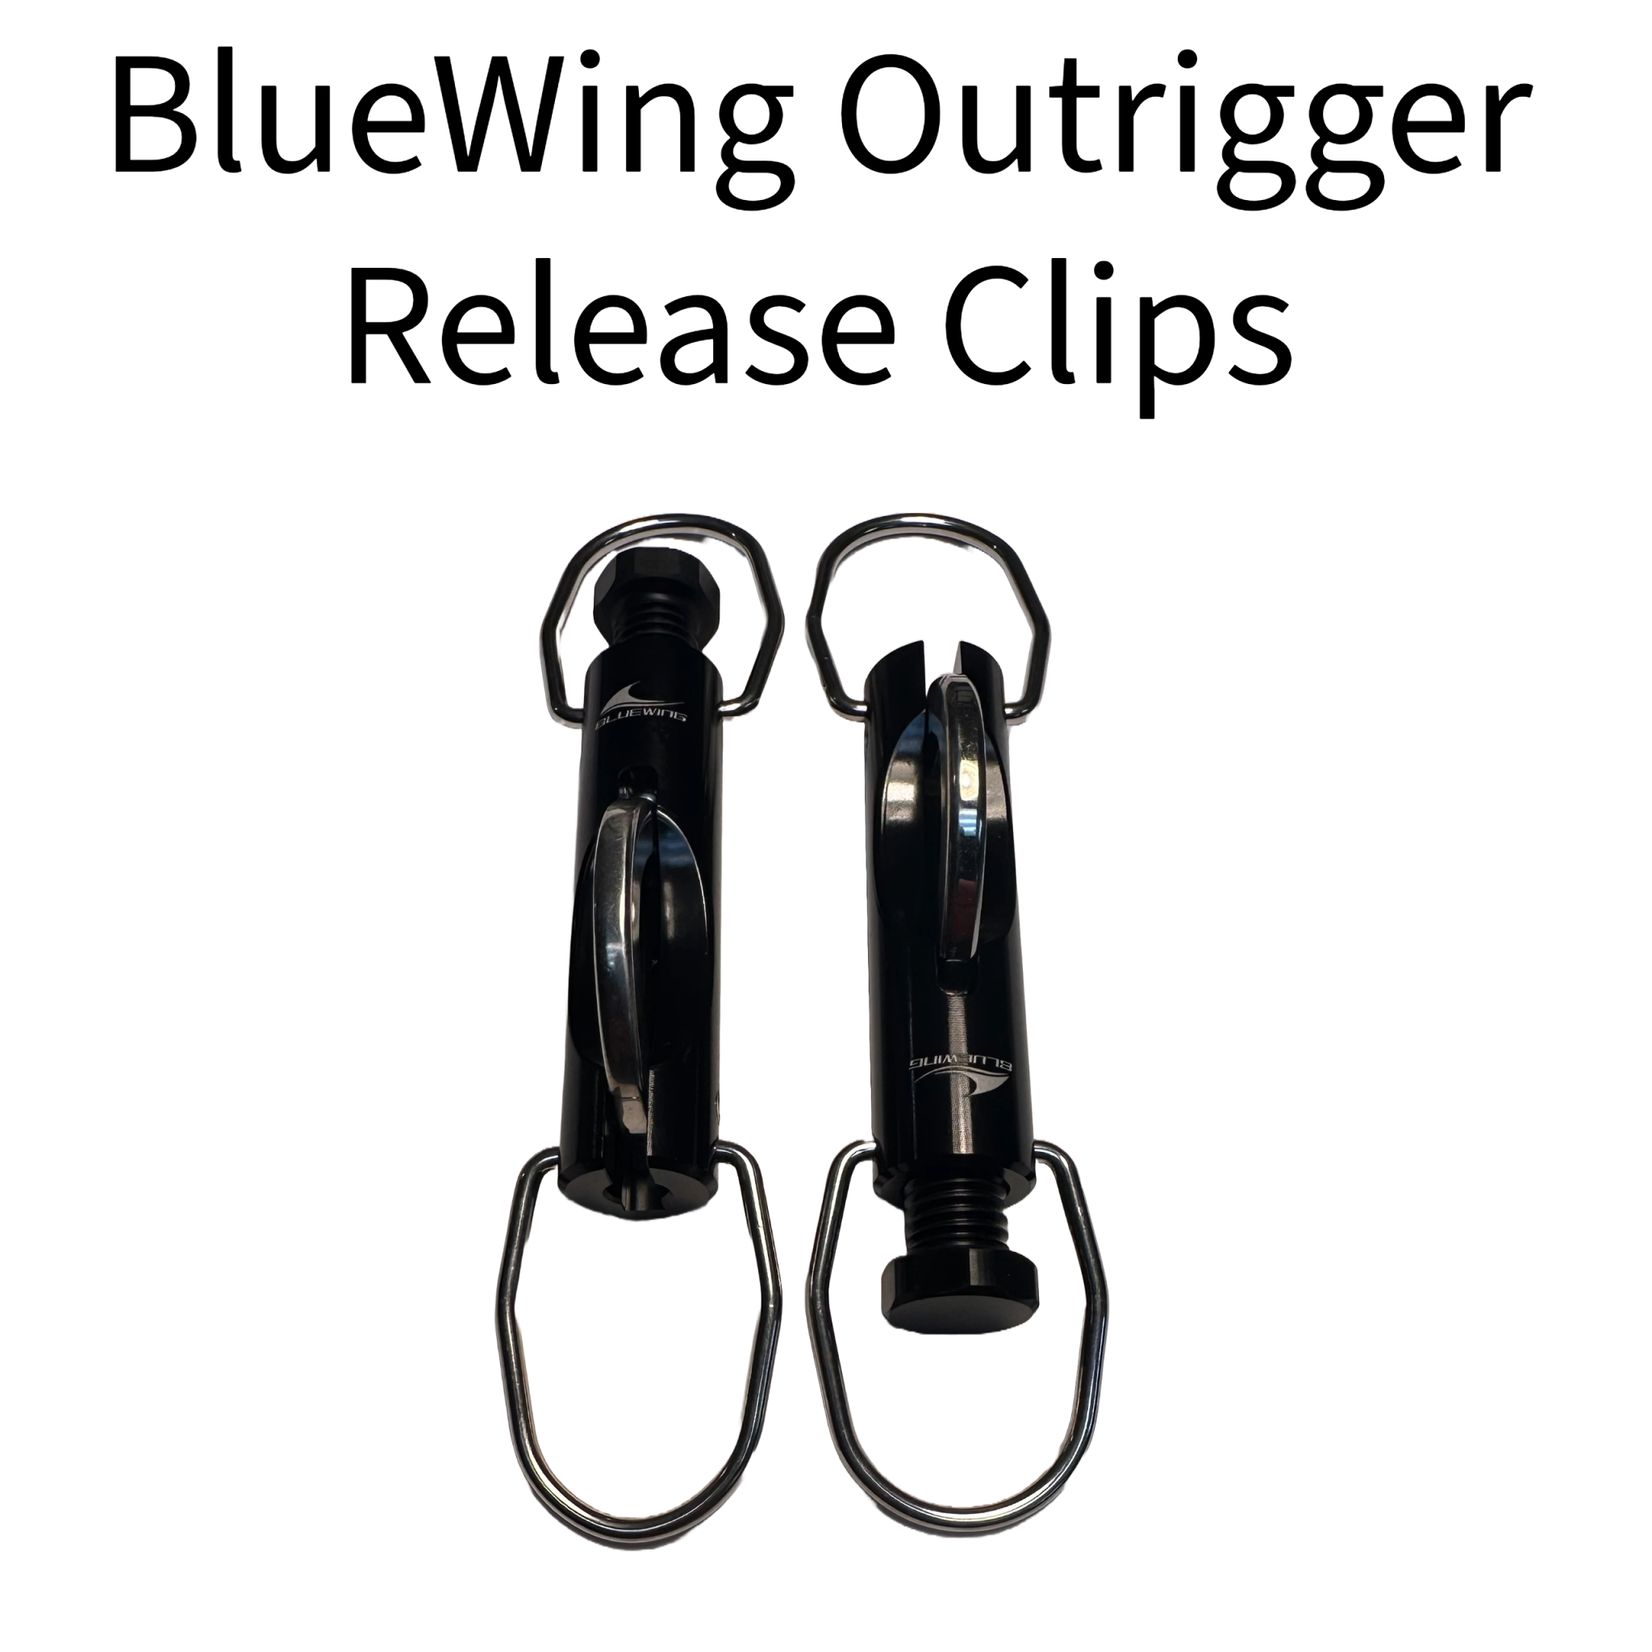 Bluewing Bluewing Outrigger Release Clips 2 pk.